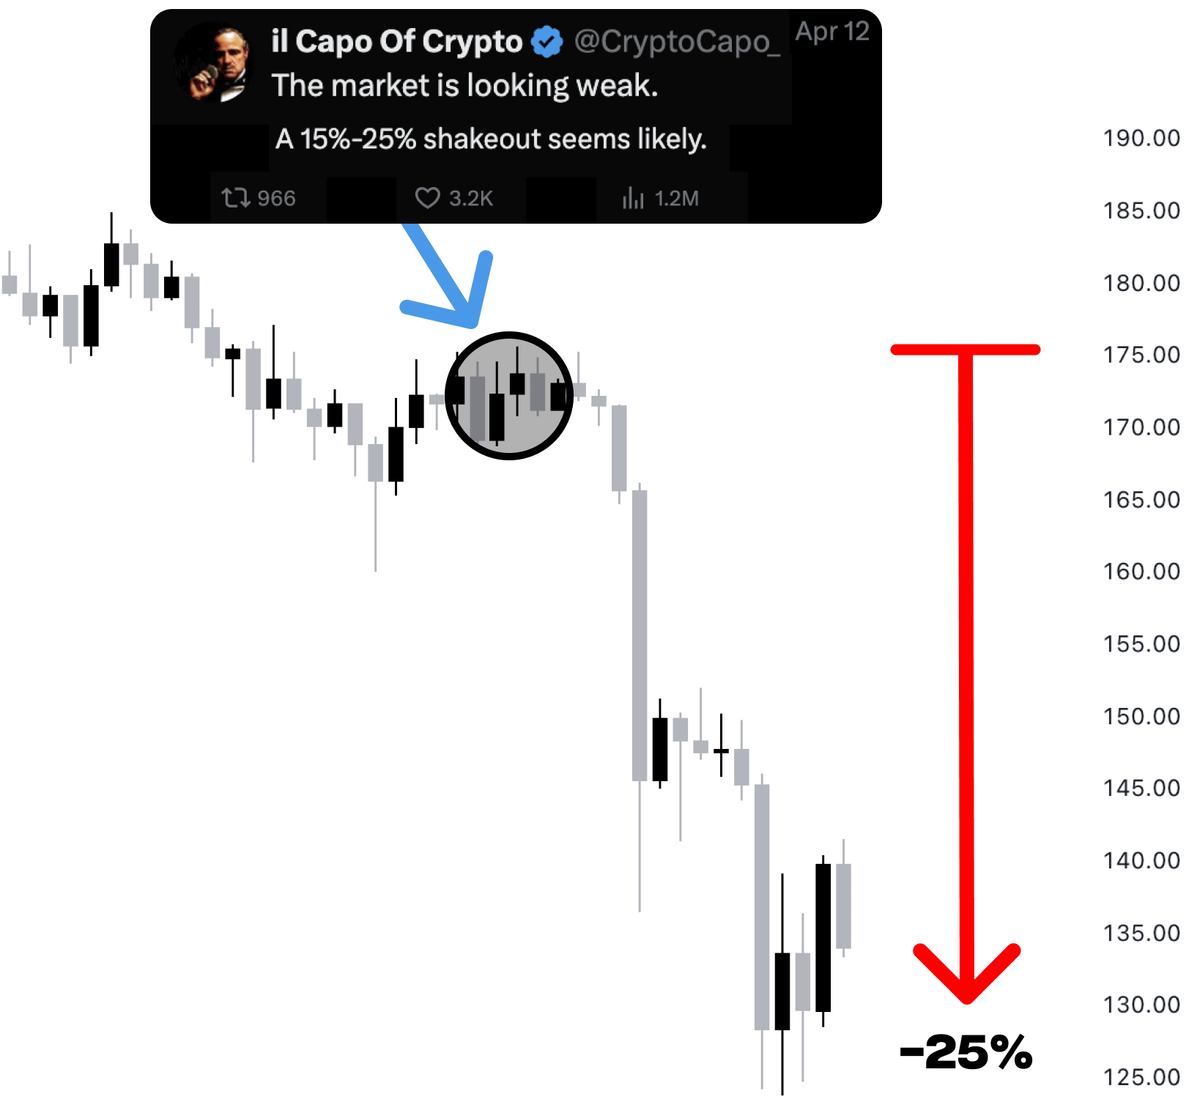 This is Capo of Crypto, one of the best crypto traders! He predicted bear cycle in 2021 and 25% dump few days ago Capo made over $100M in crypto and now he shared more predictions for this Altseason I spent a week scanning all his tweets and found next 100x bets 🧵👇